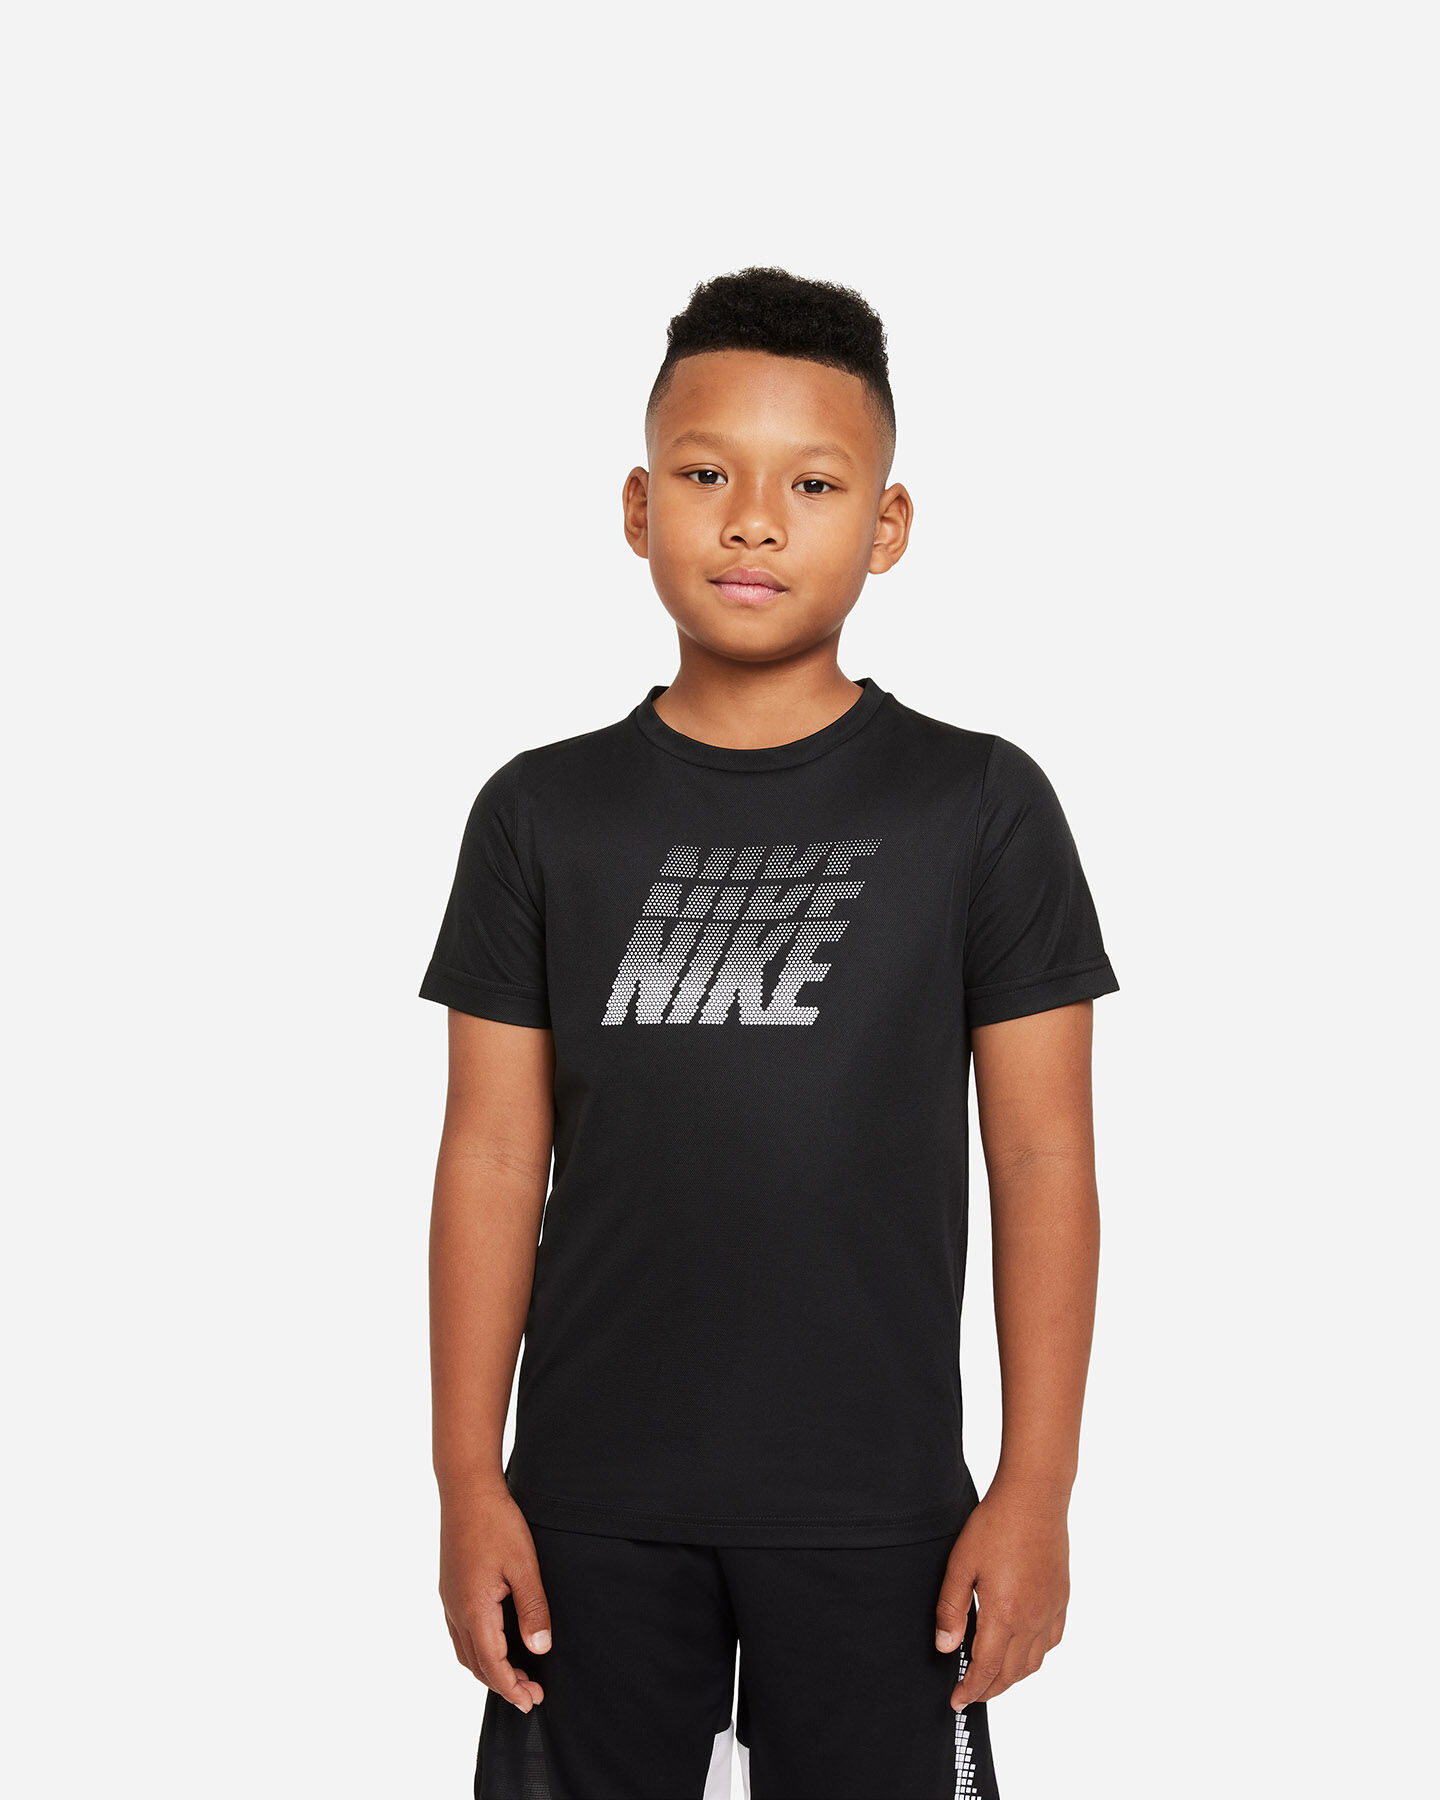  T-Shirt NIKE LOGO EXTENDED JR S5320250|010|S scatto 0